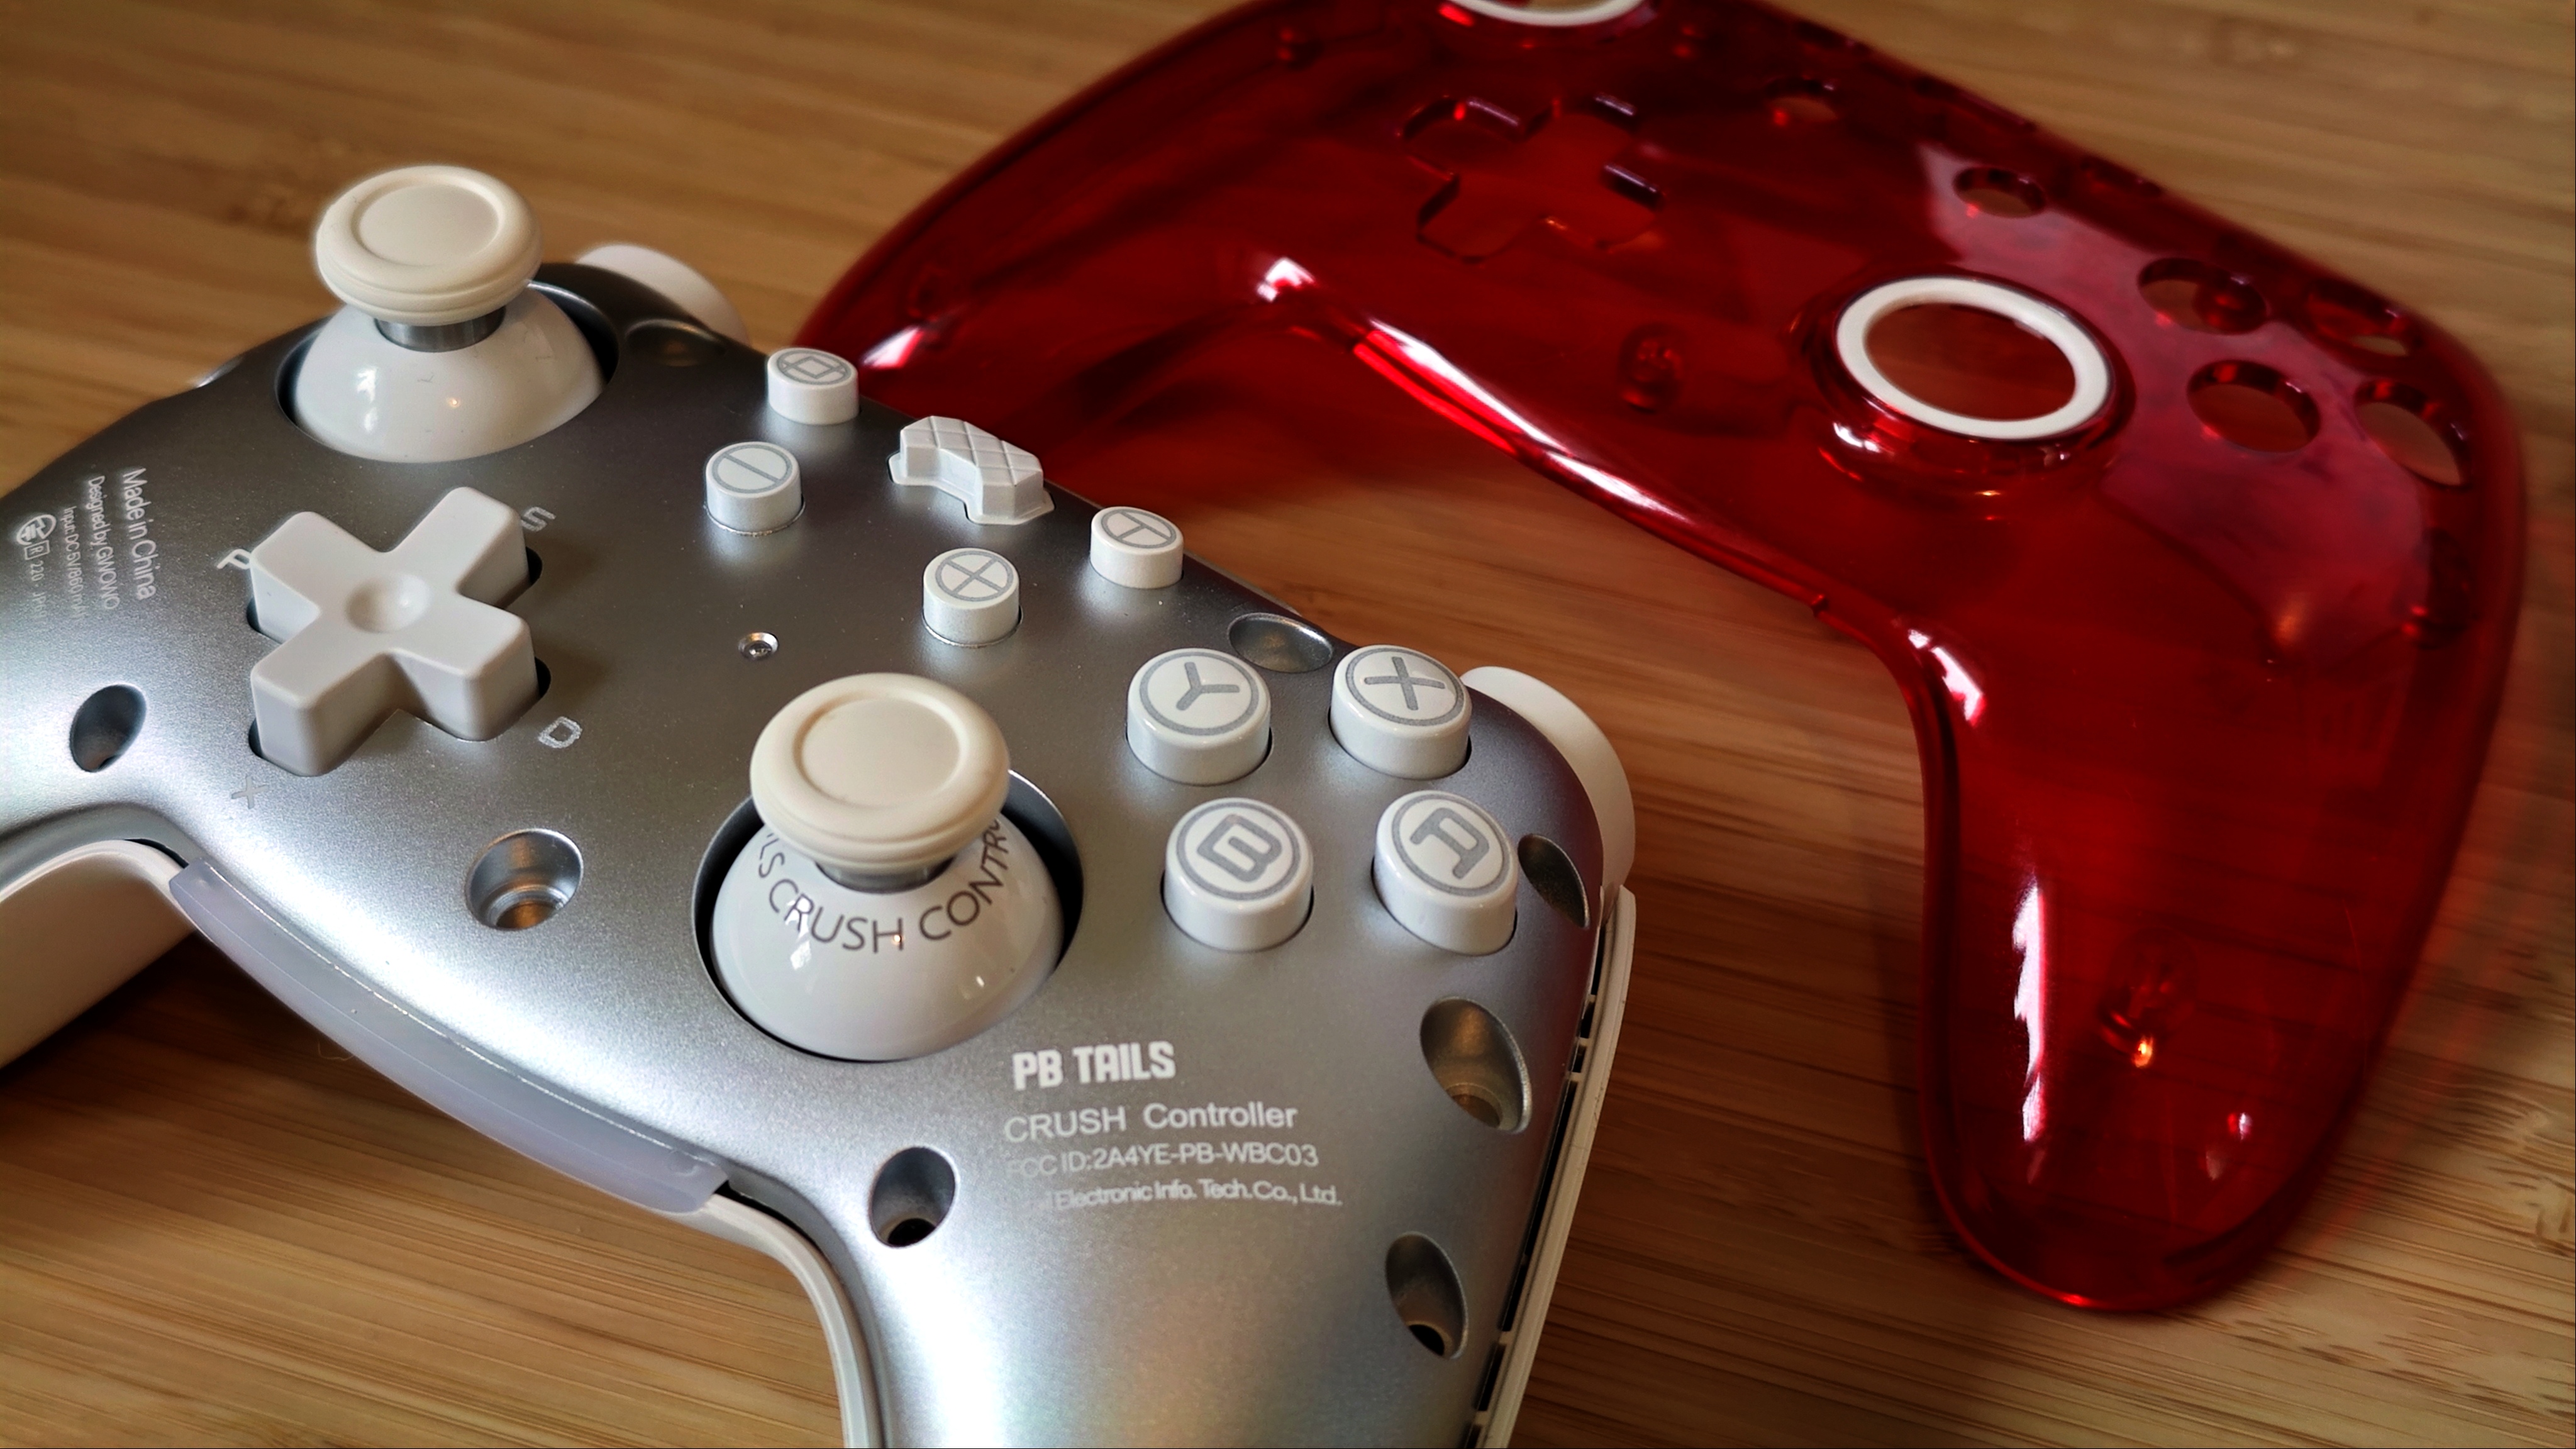 A Ruby red PB Tails gaming controller sitting on a wooden desk